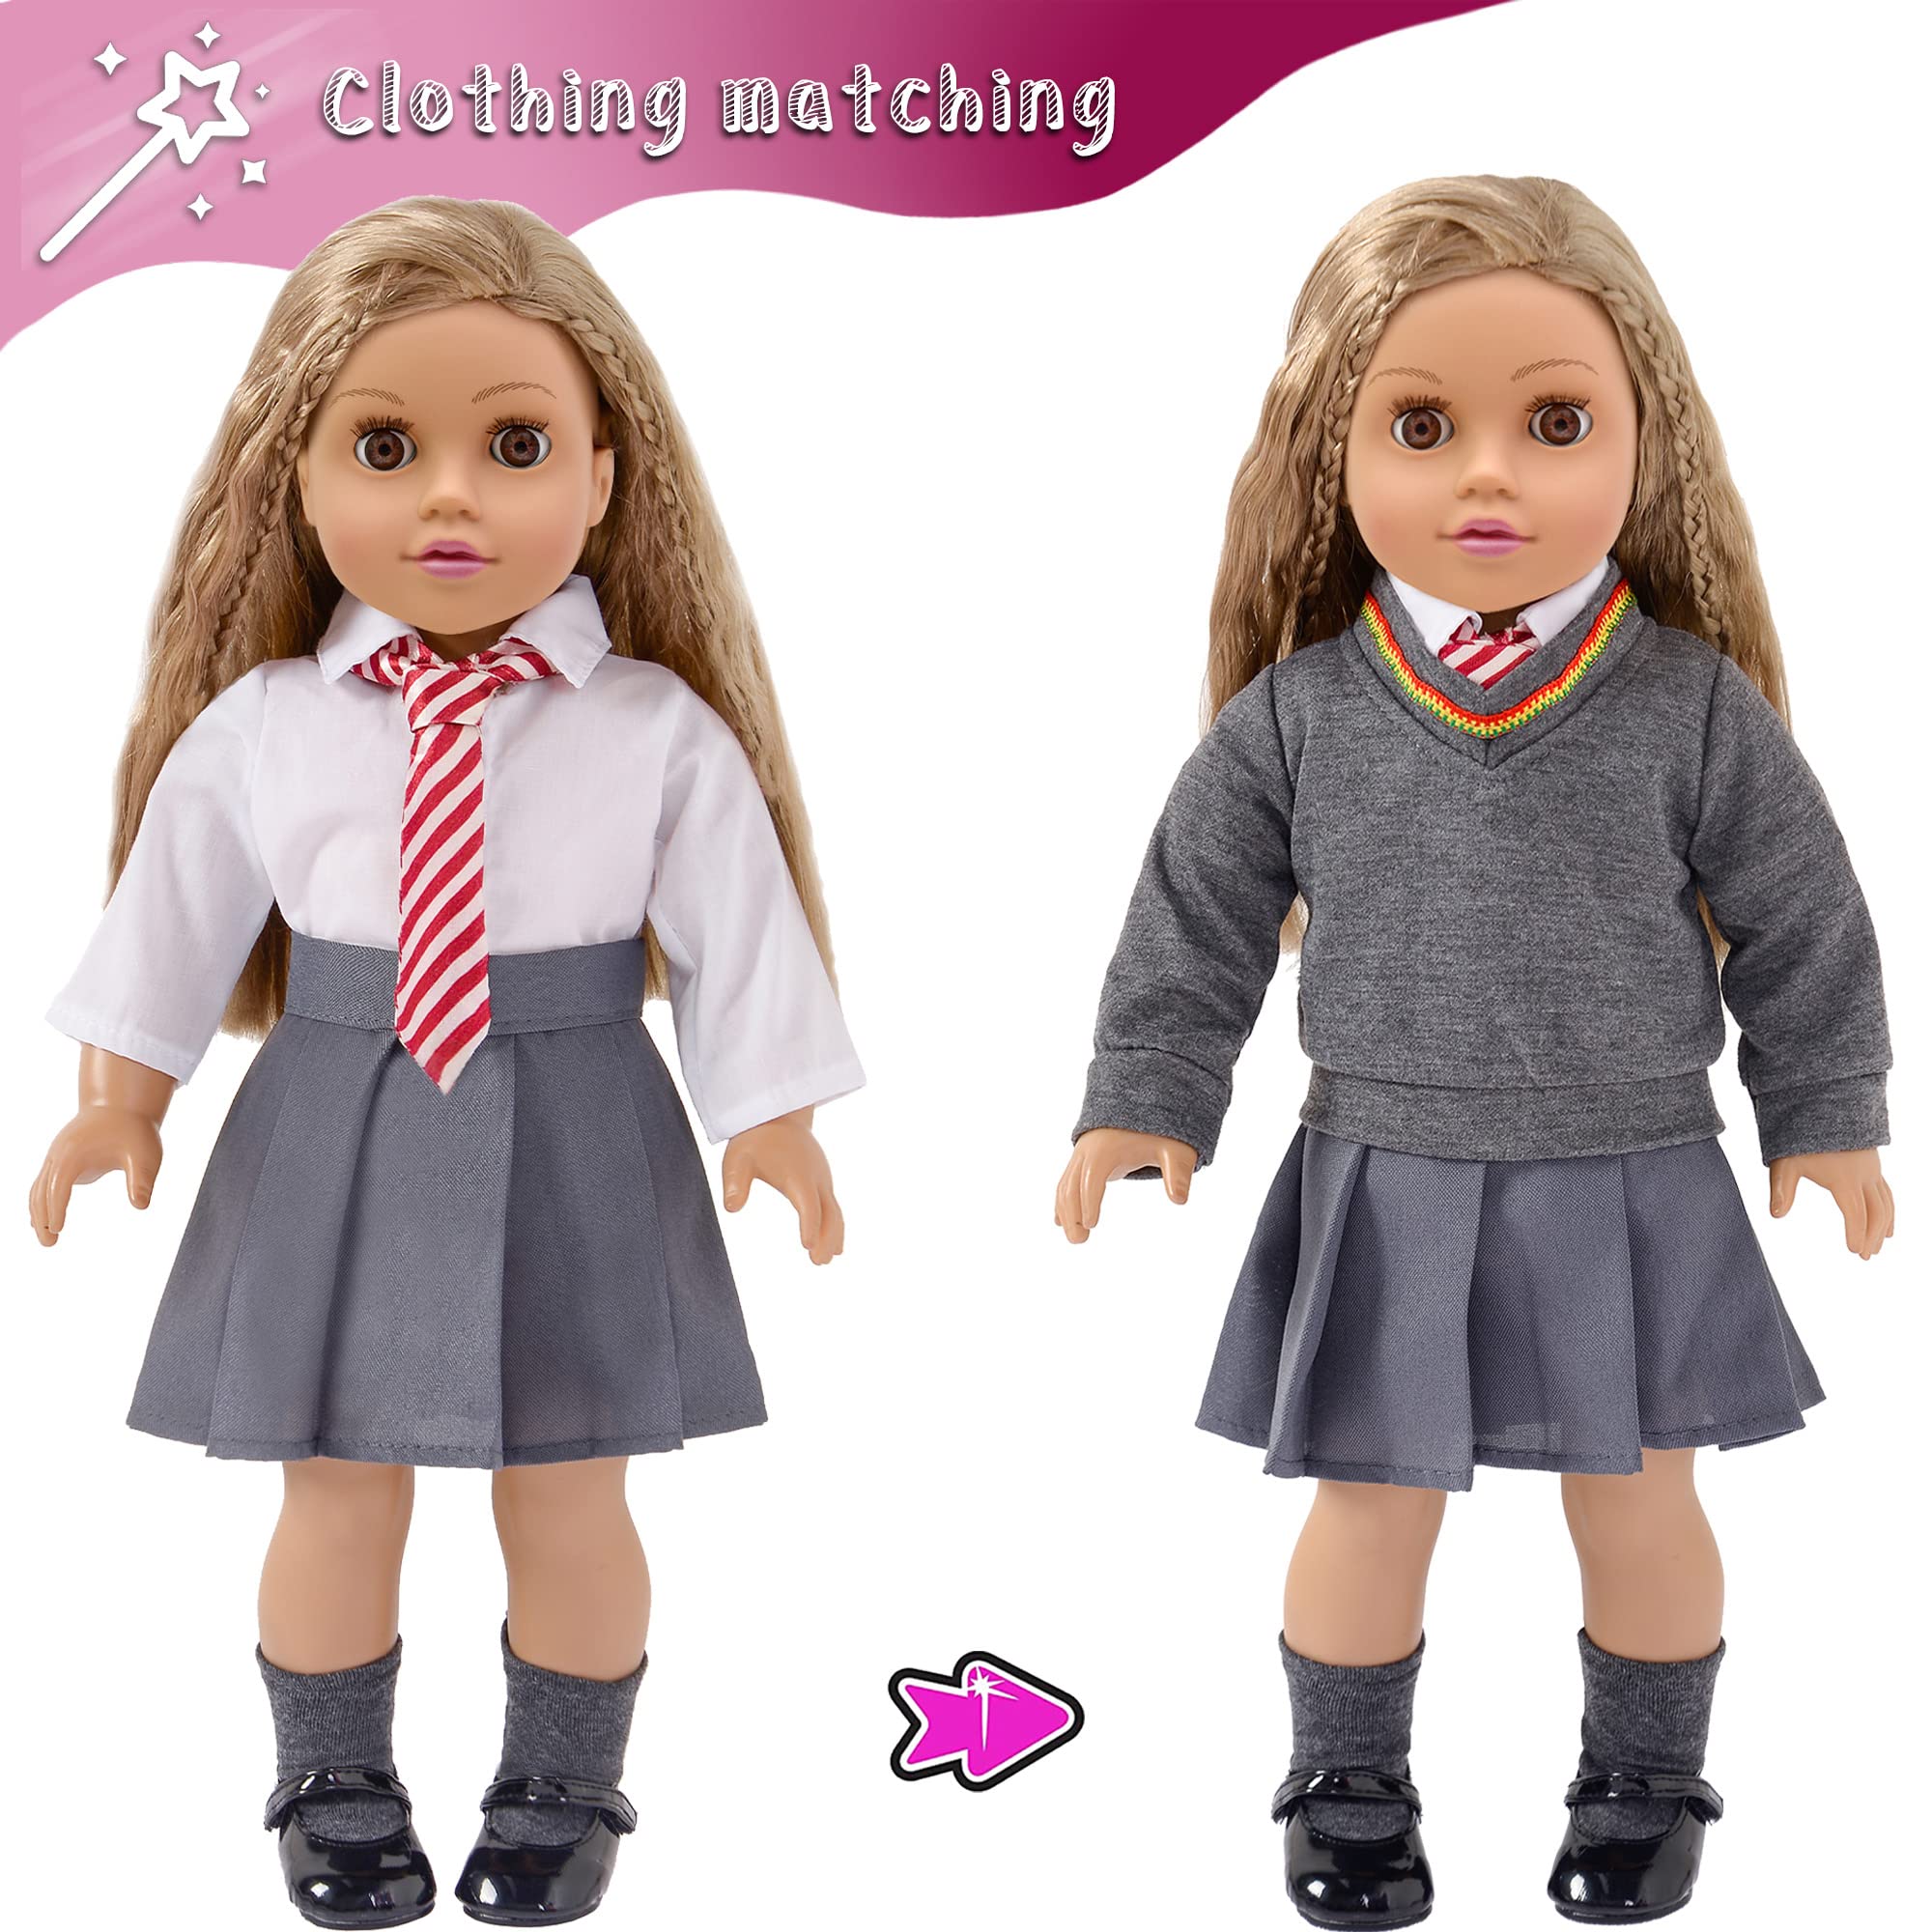 18 inch Dolls Magic School Uniform Inspired Costume Doll Clothes Accessories Set Include Outfit Shoes for Girls Gift (No Doll)